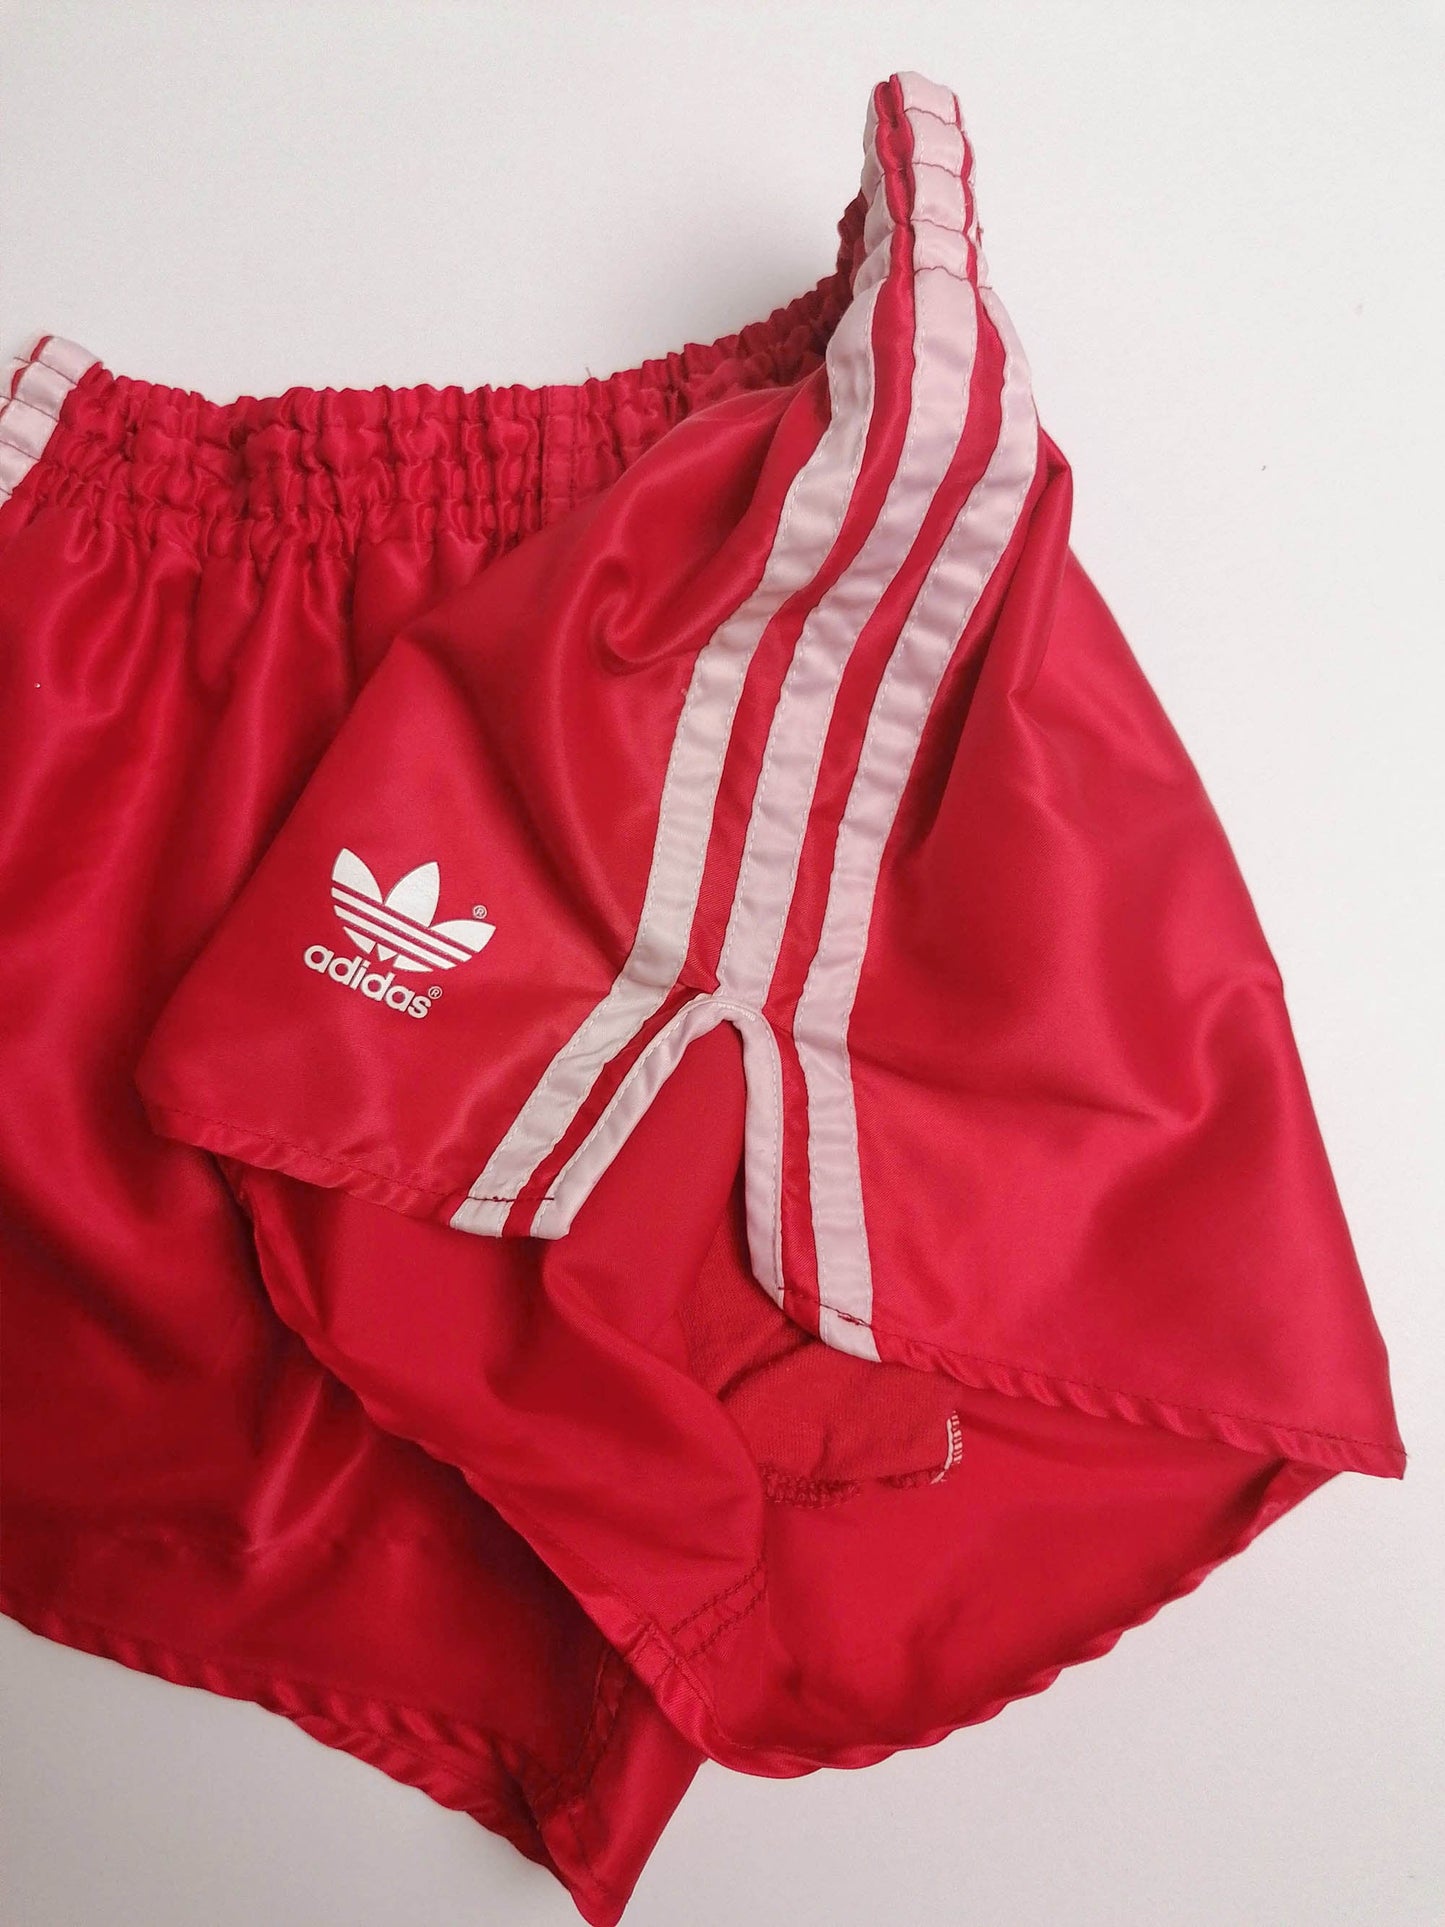 80's Adidas Running Shorts Red - size XS / D4